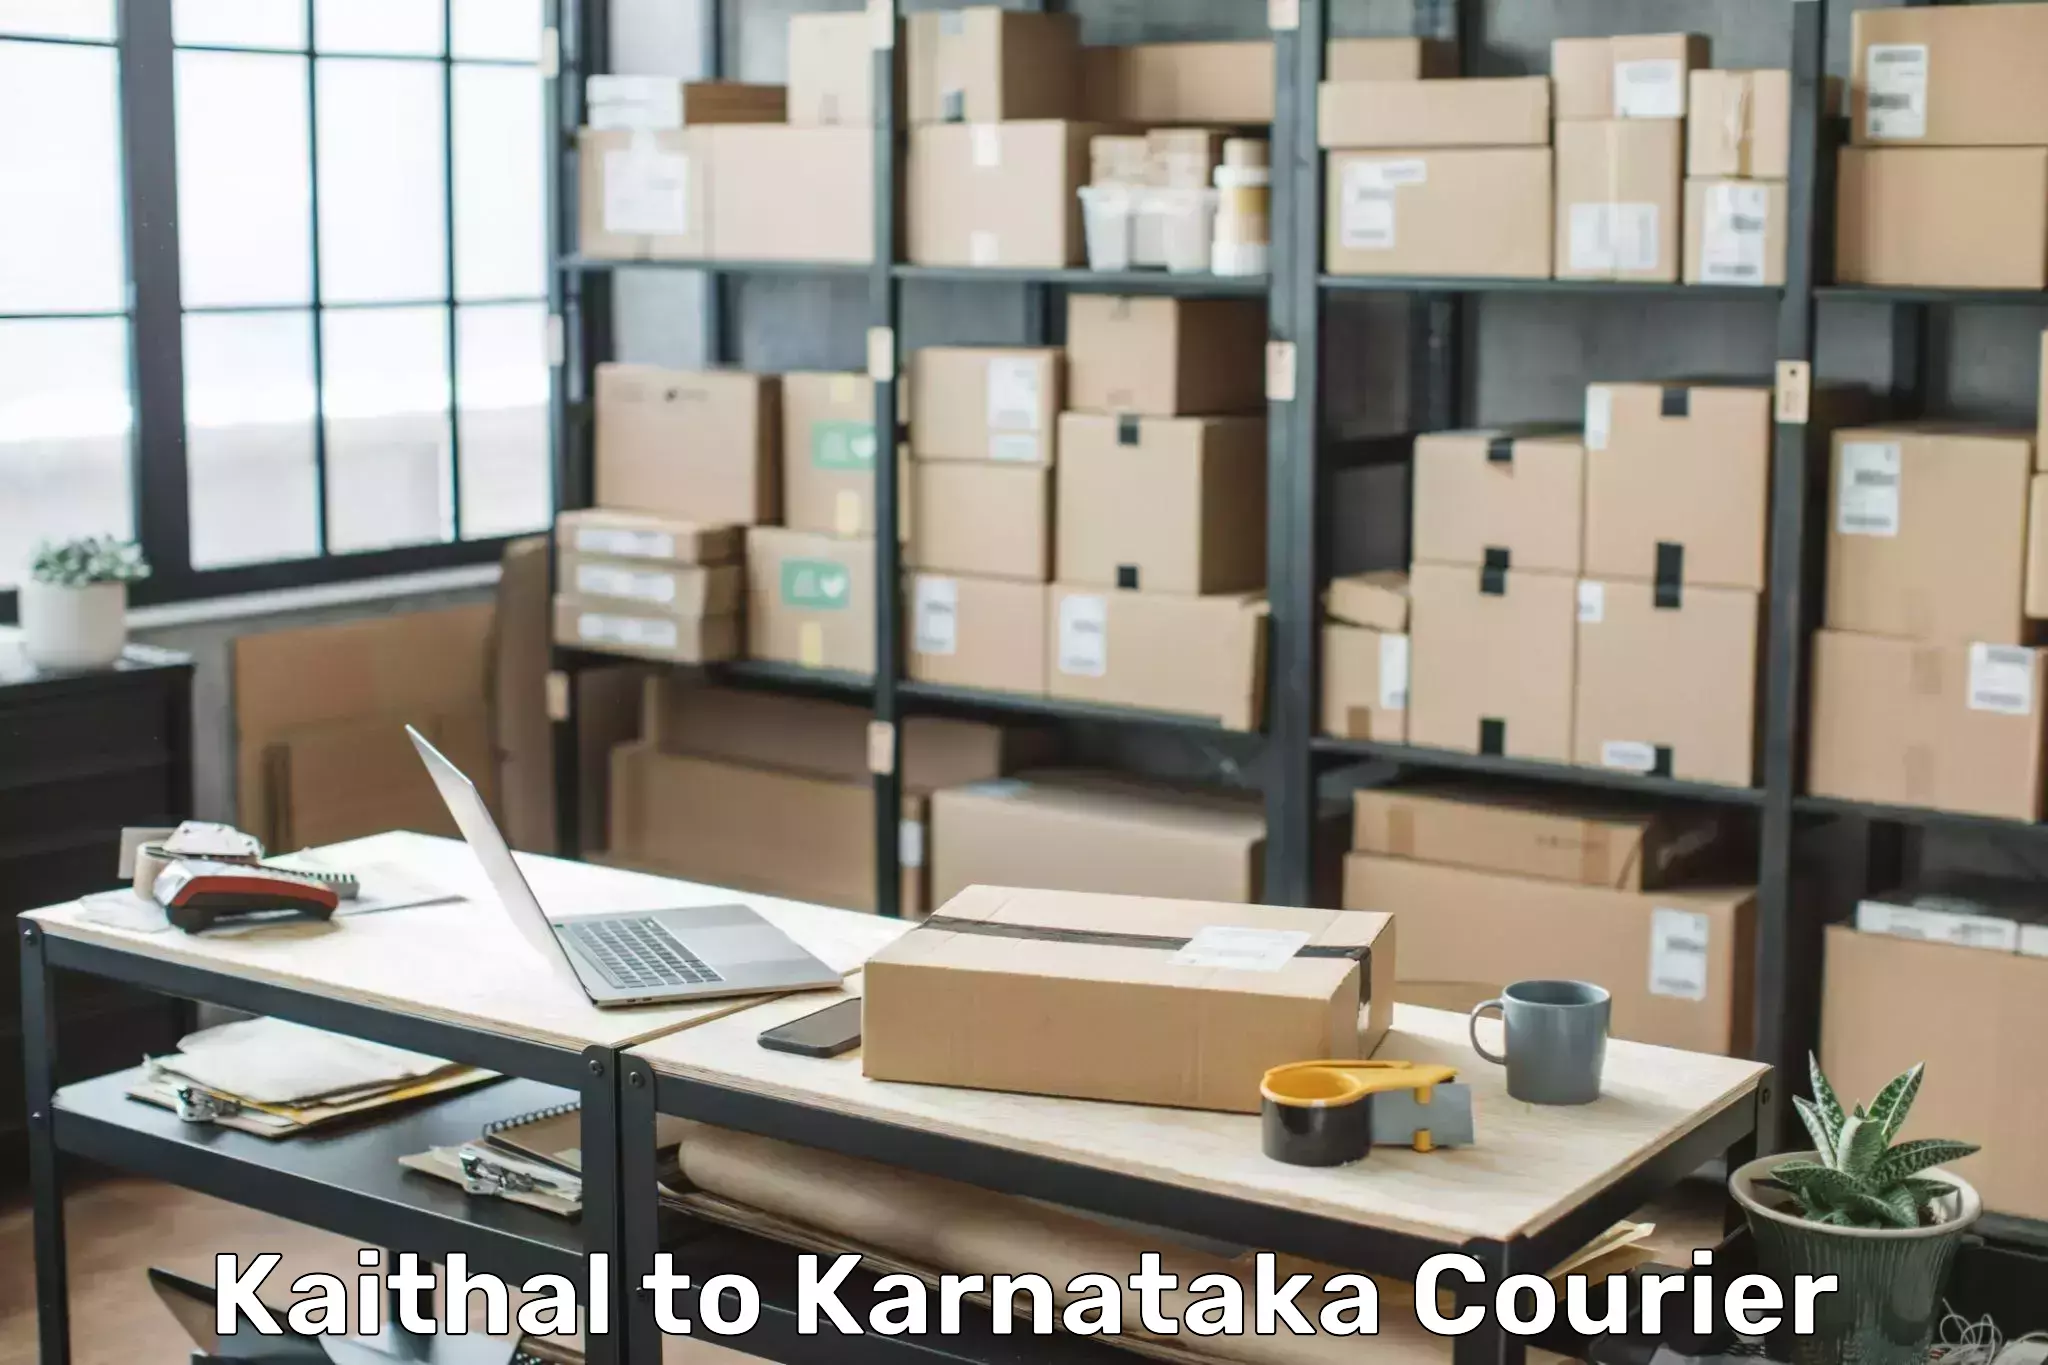 Luggage shipment specialists Kaithal to Gonikoppal